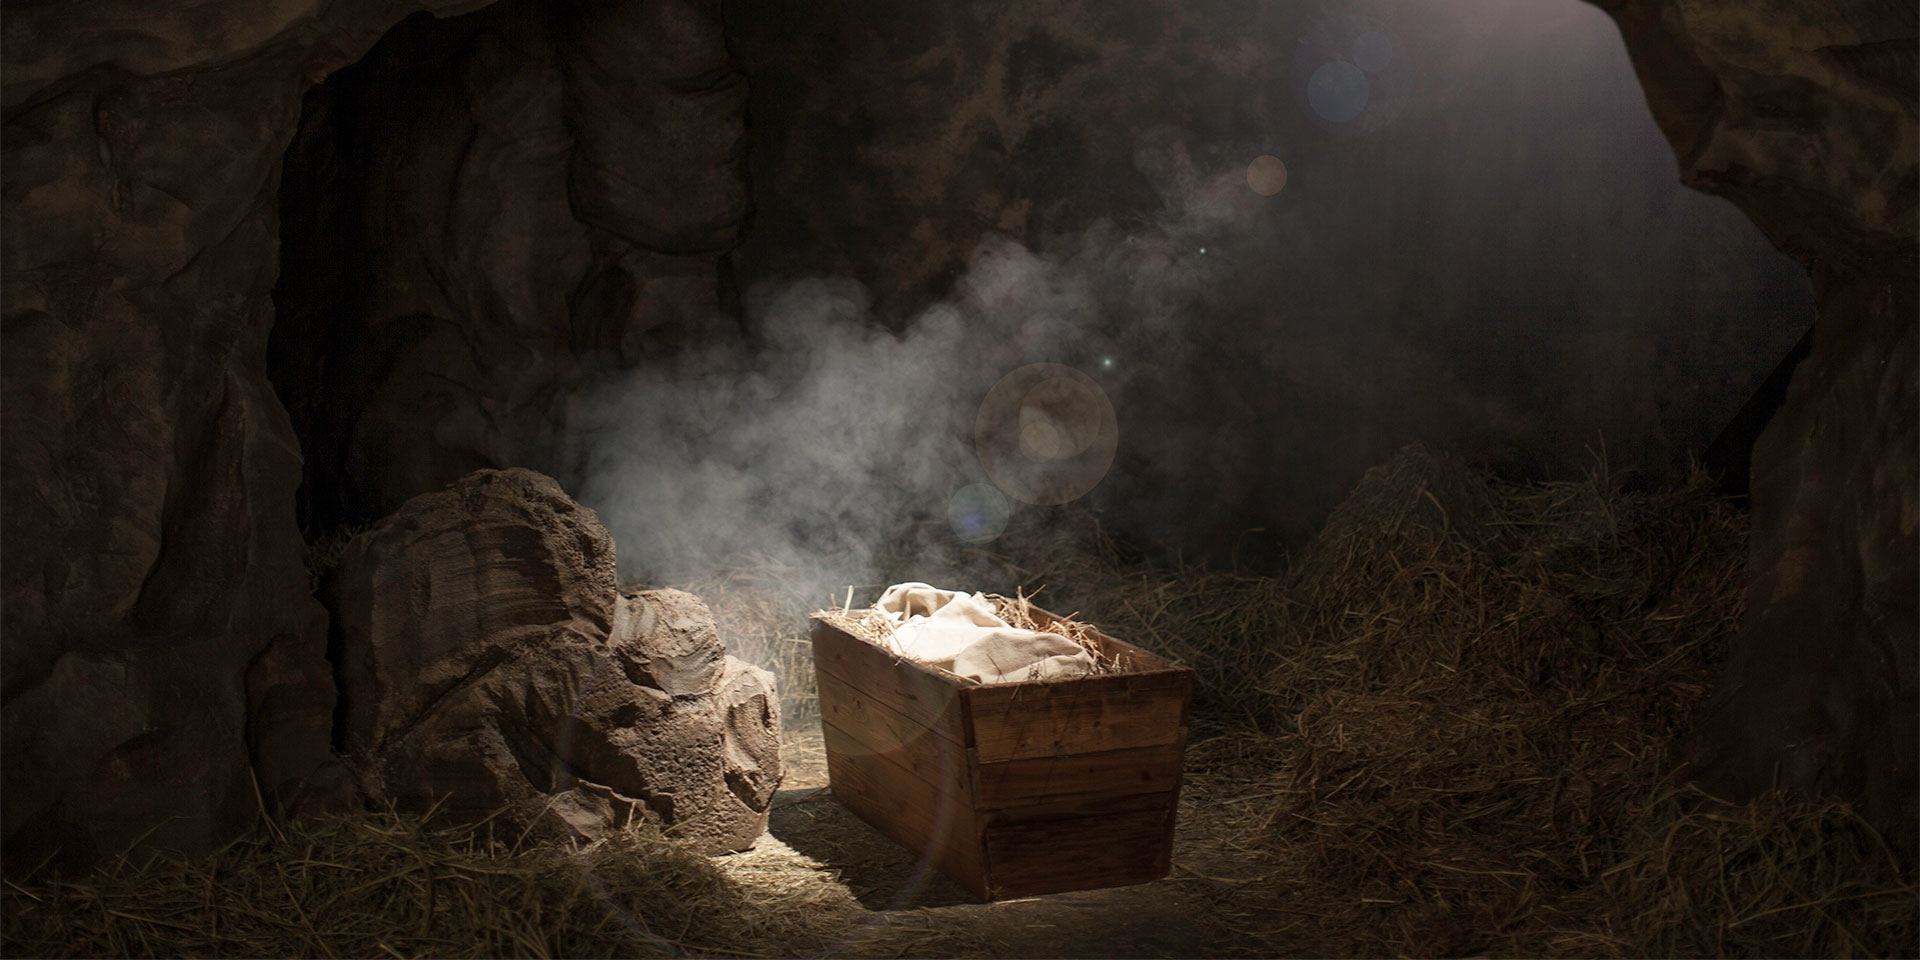 The manger, the sign of humility that elevates (us)